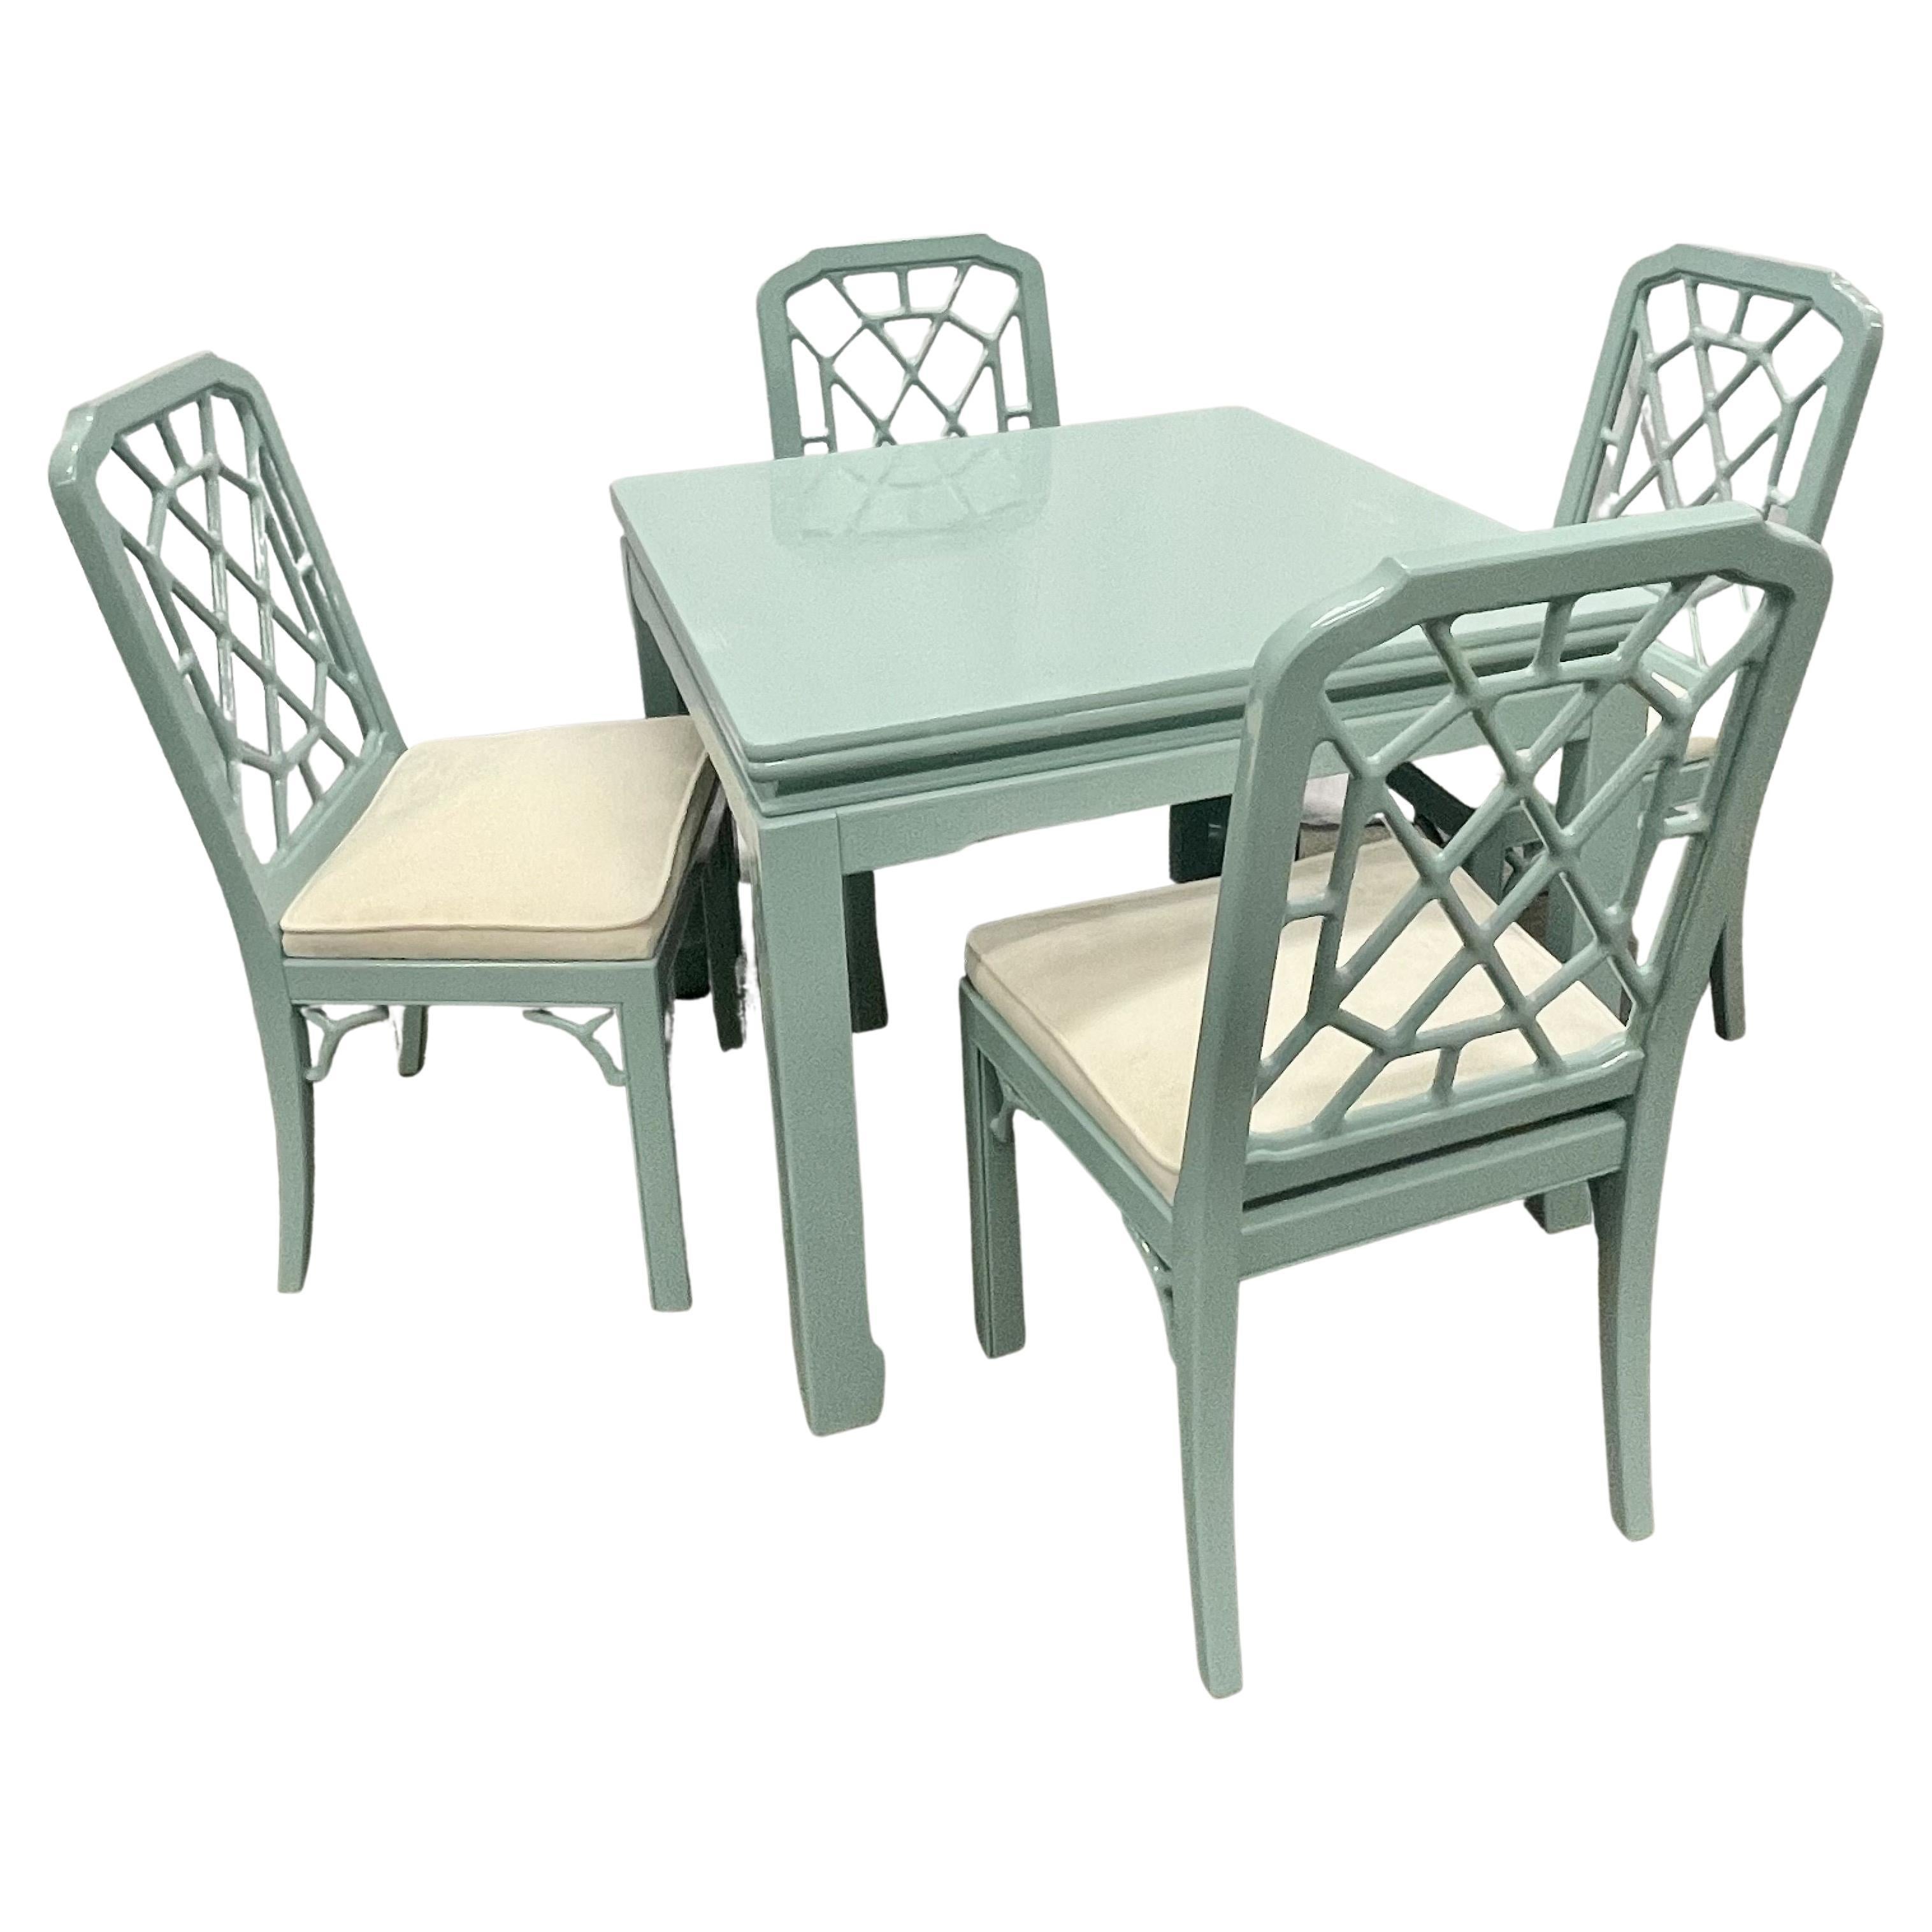 John Widdicomb Game, Dining, Card Table and Chairs Set, Mid-Century Modern